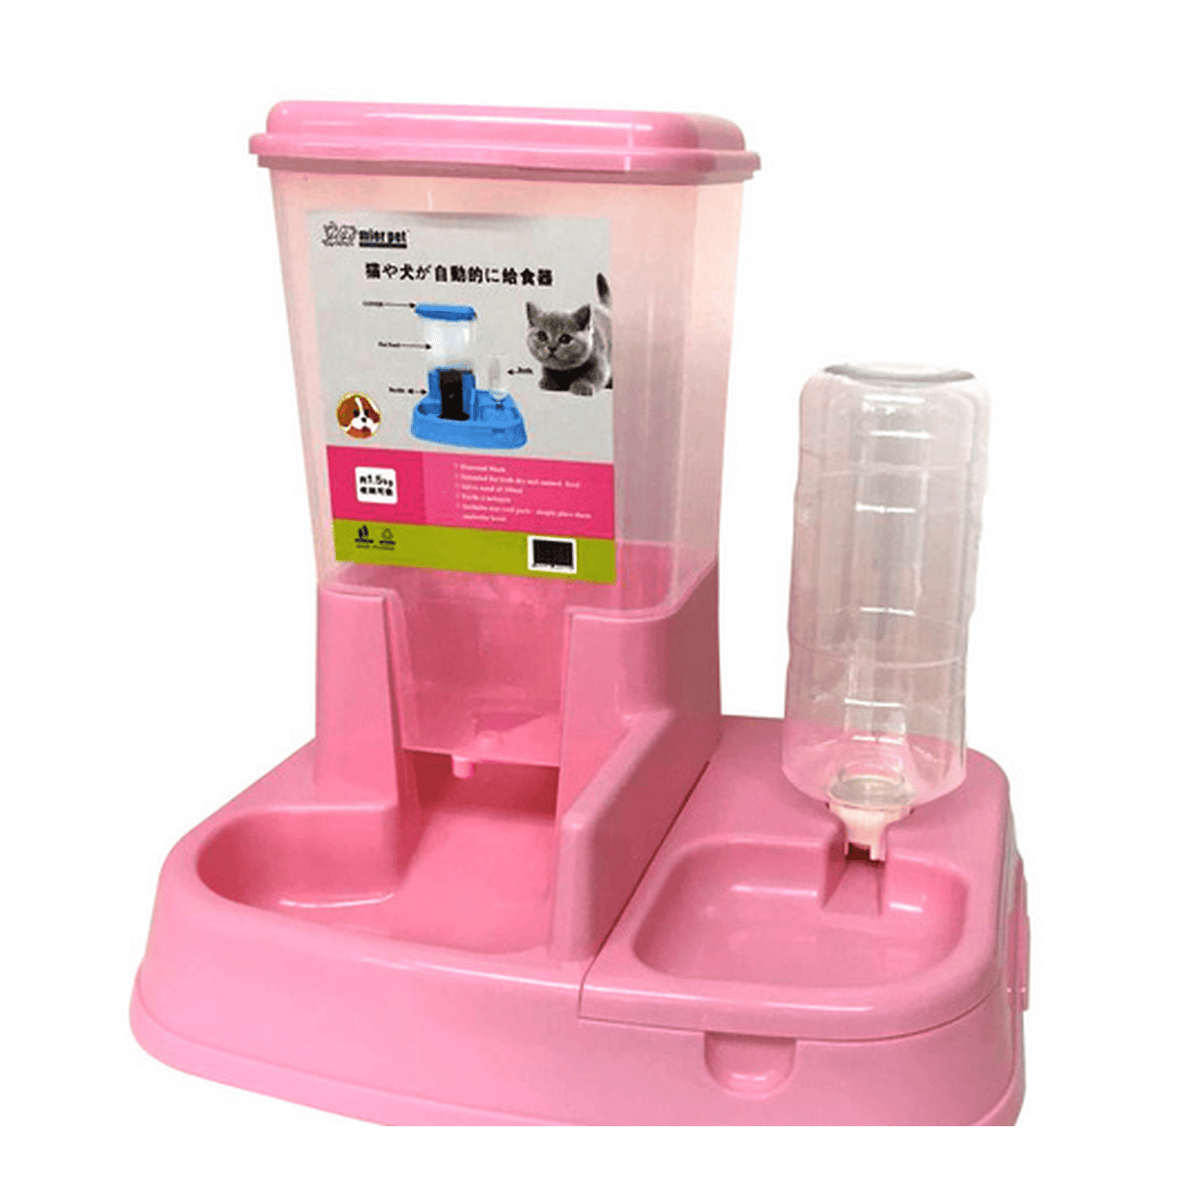 🐾 Adjustable Flow Rate Automatic Pet Feeder 🔁